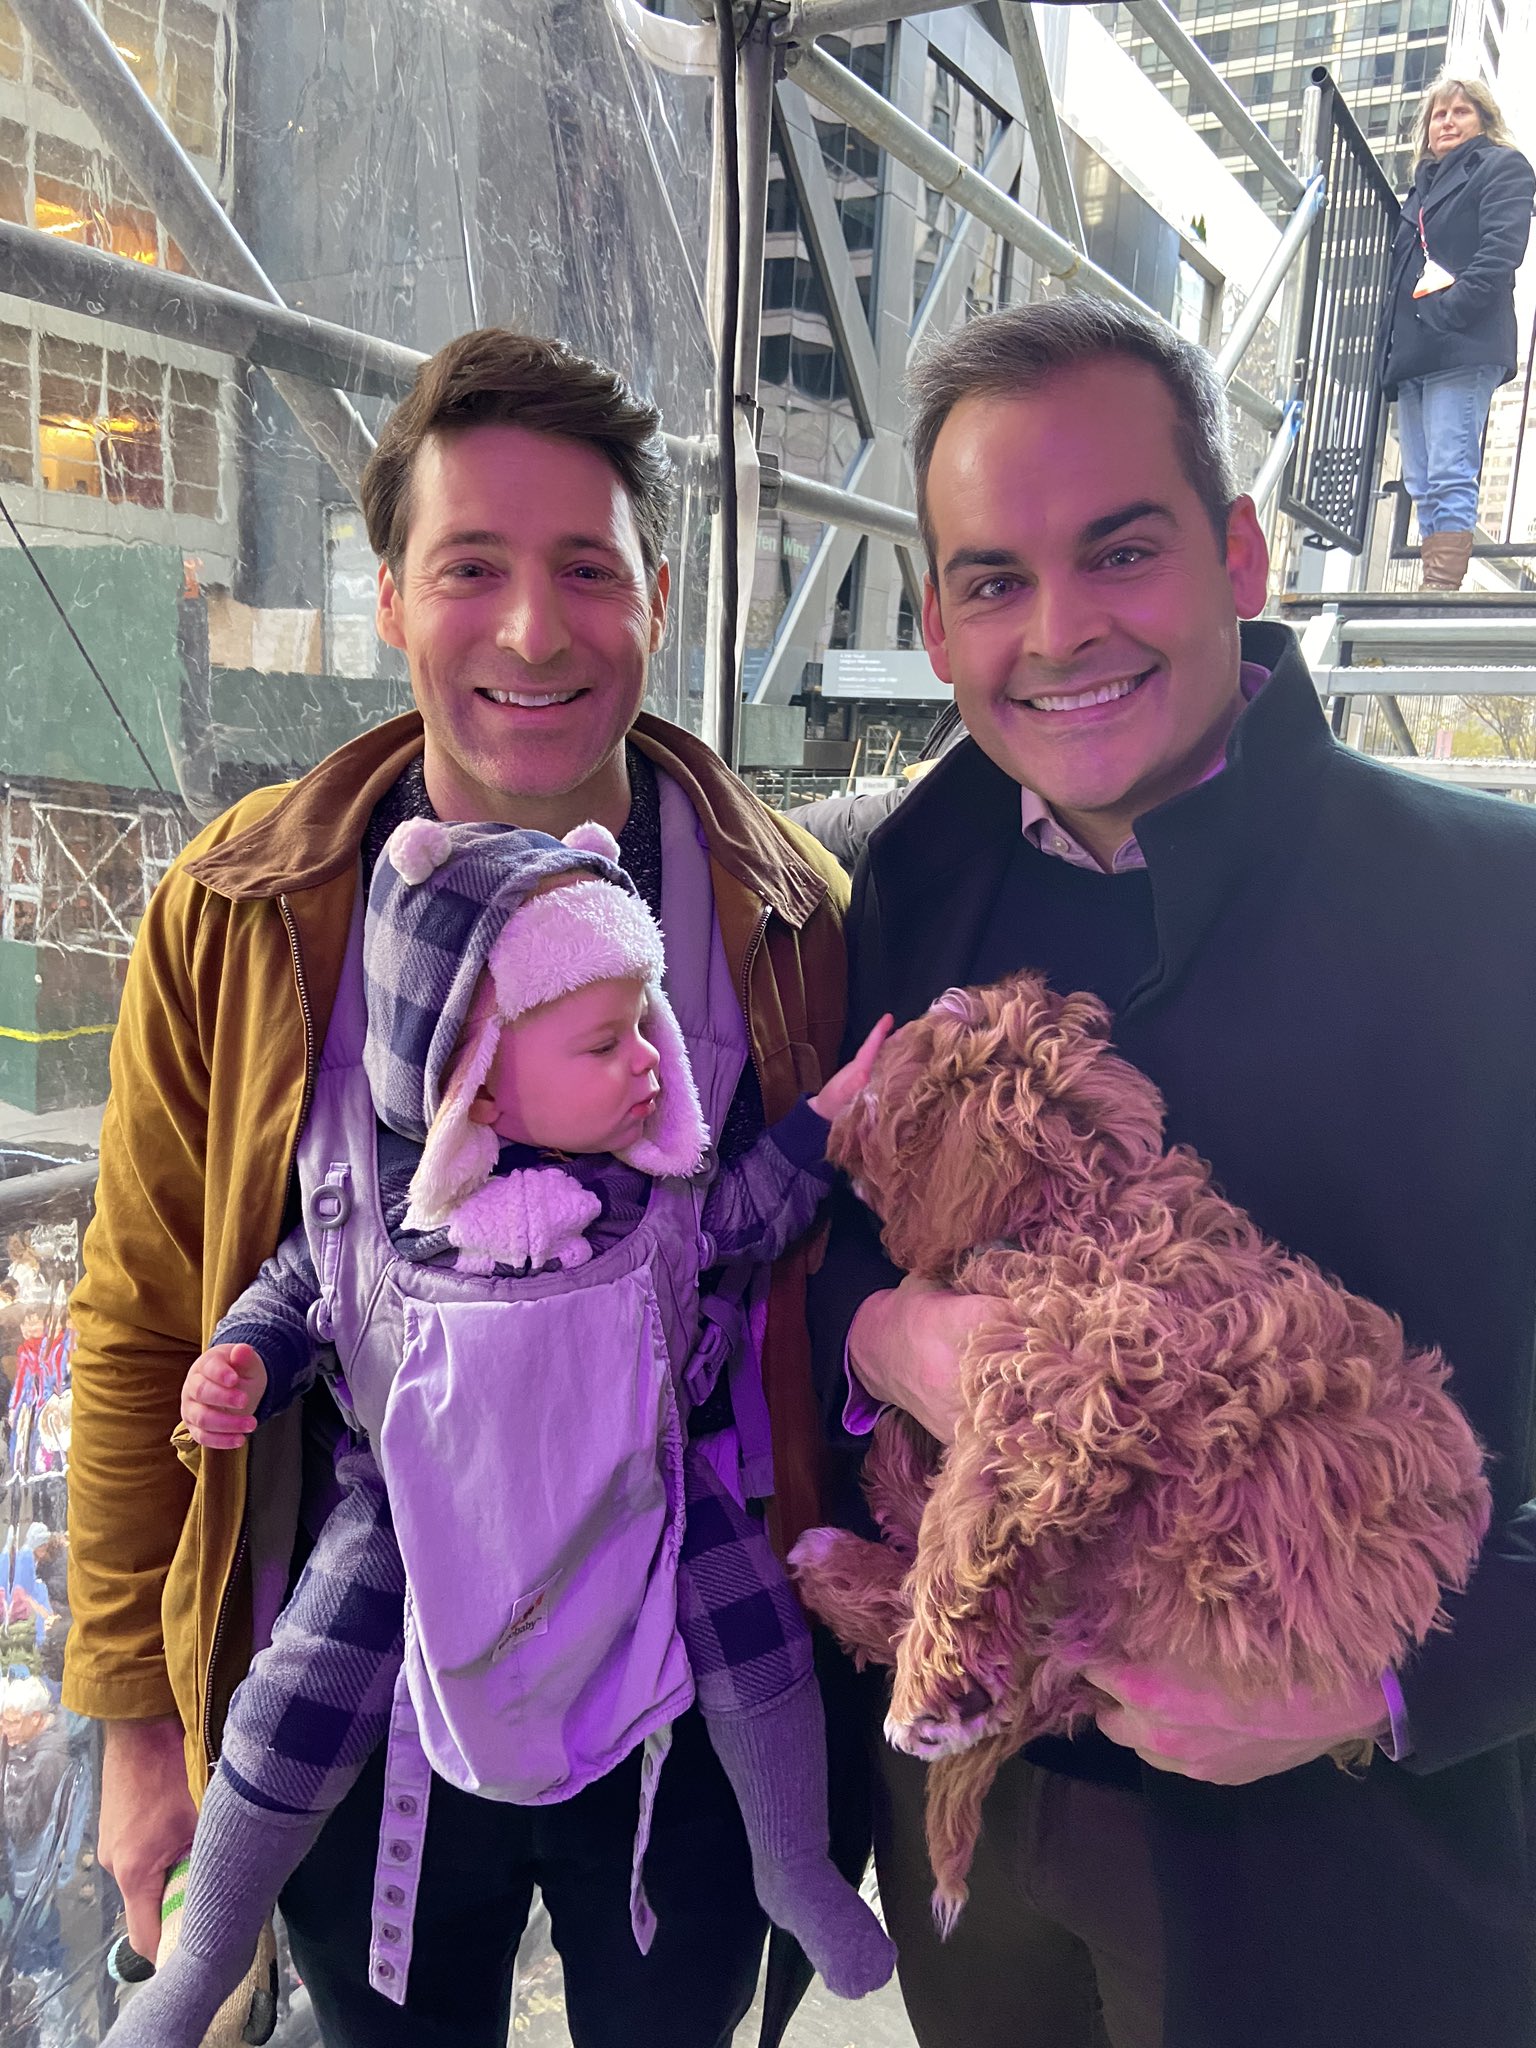 David Begnaud on Twitter: "Making friends on Thanksgiving - @tonydokoupil's baby, Teddy (who's middle name is Bear) met Paddington Boricua (who's named after 'Paddington' Bear) #Instantbuds #MacysThanksgivingDayParade https://t.co/AGhUjoCIXp" / Twitter